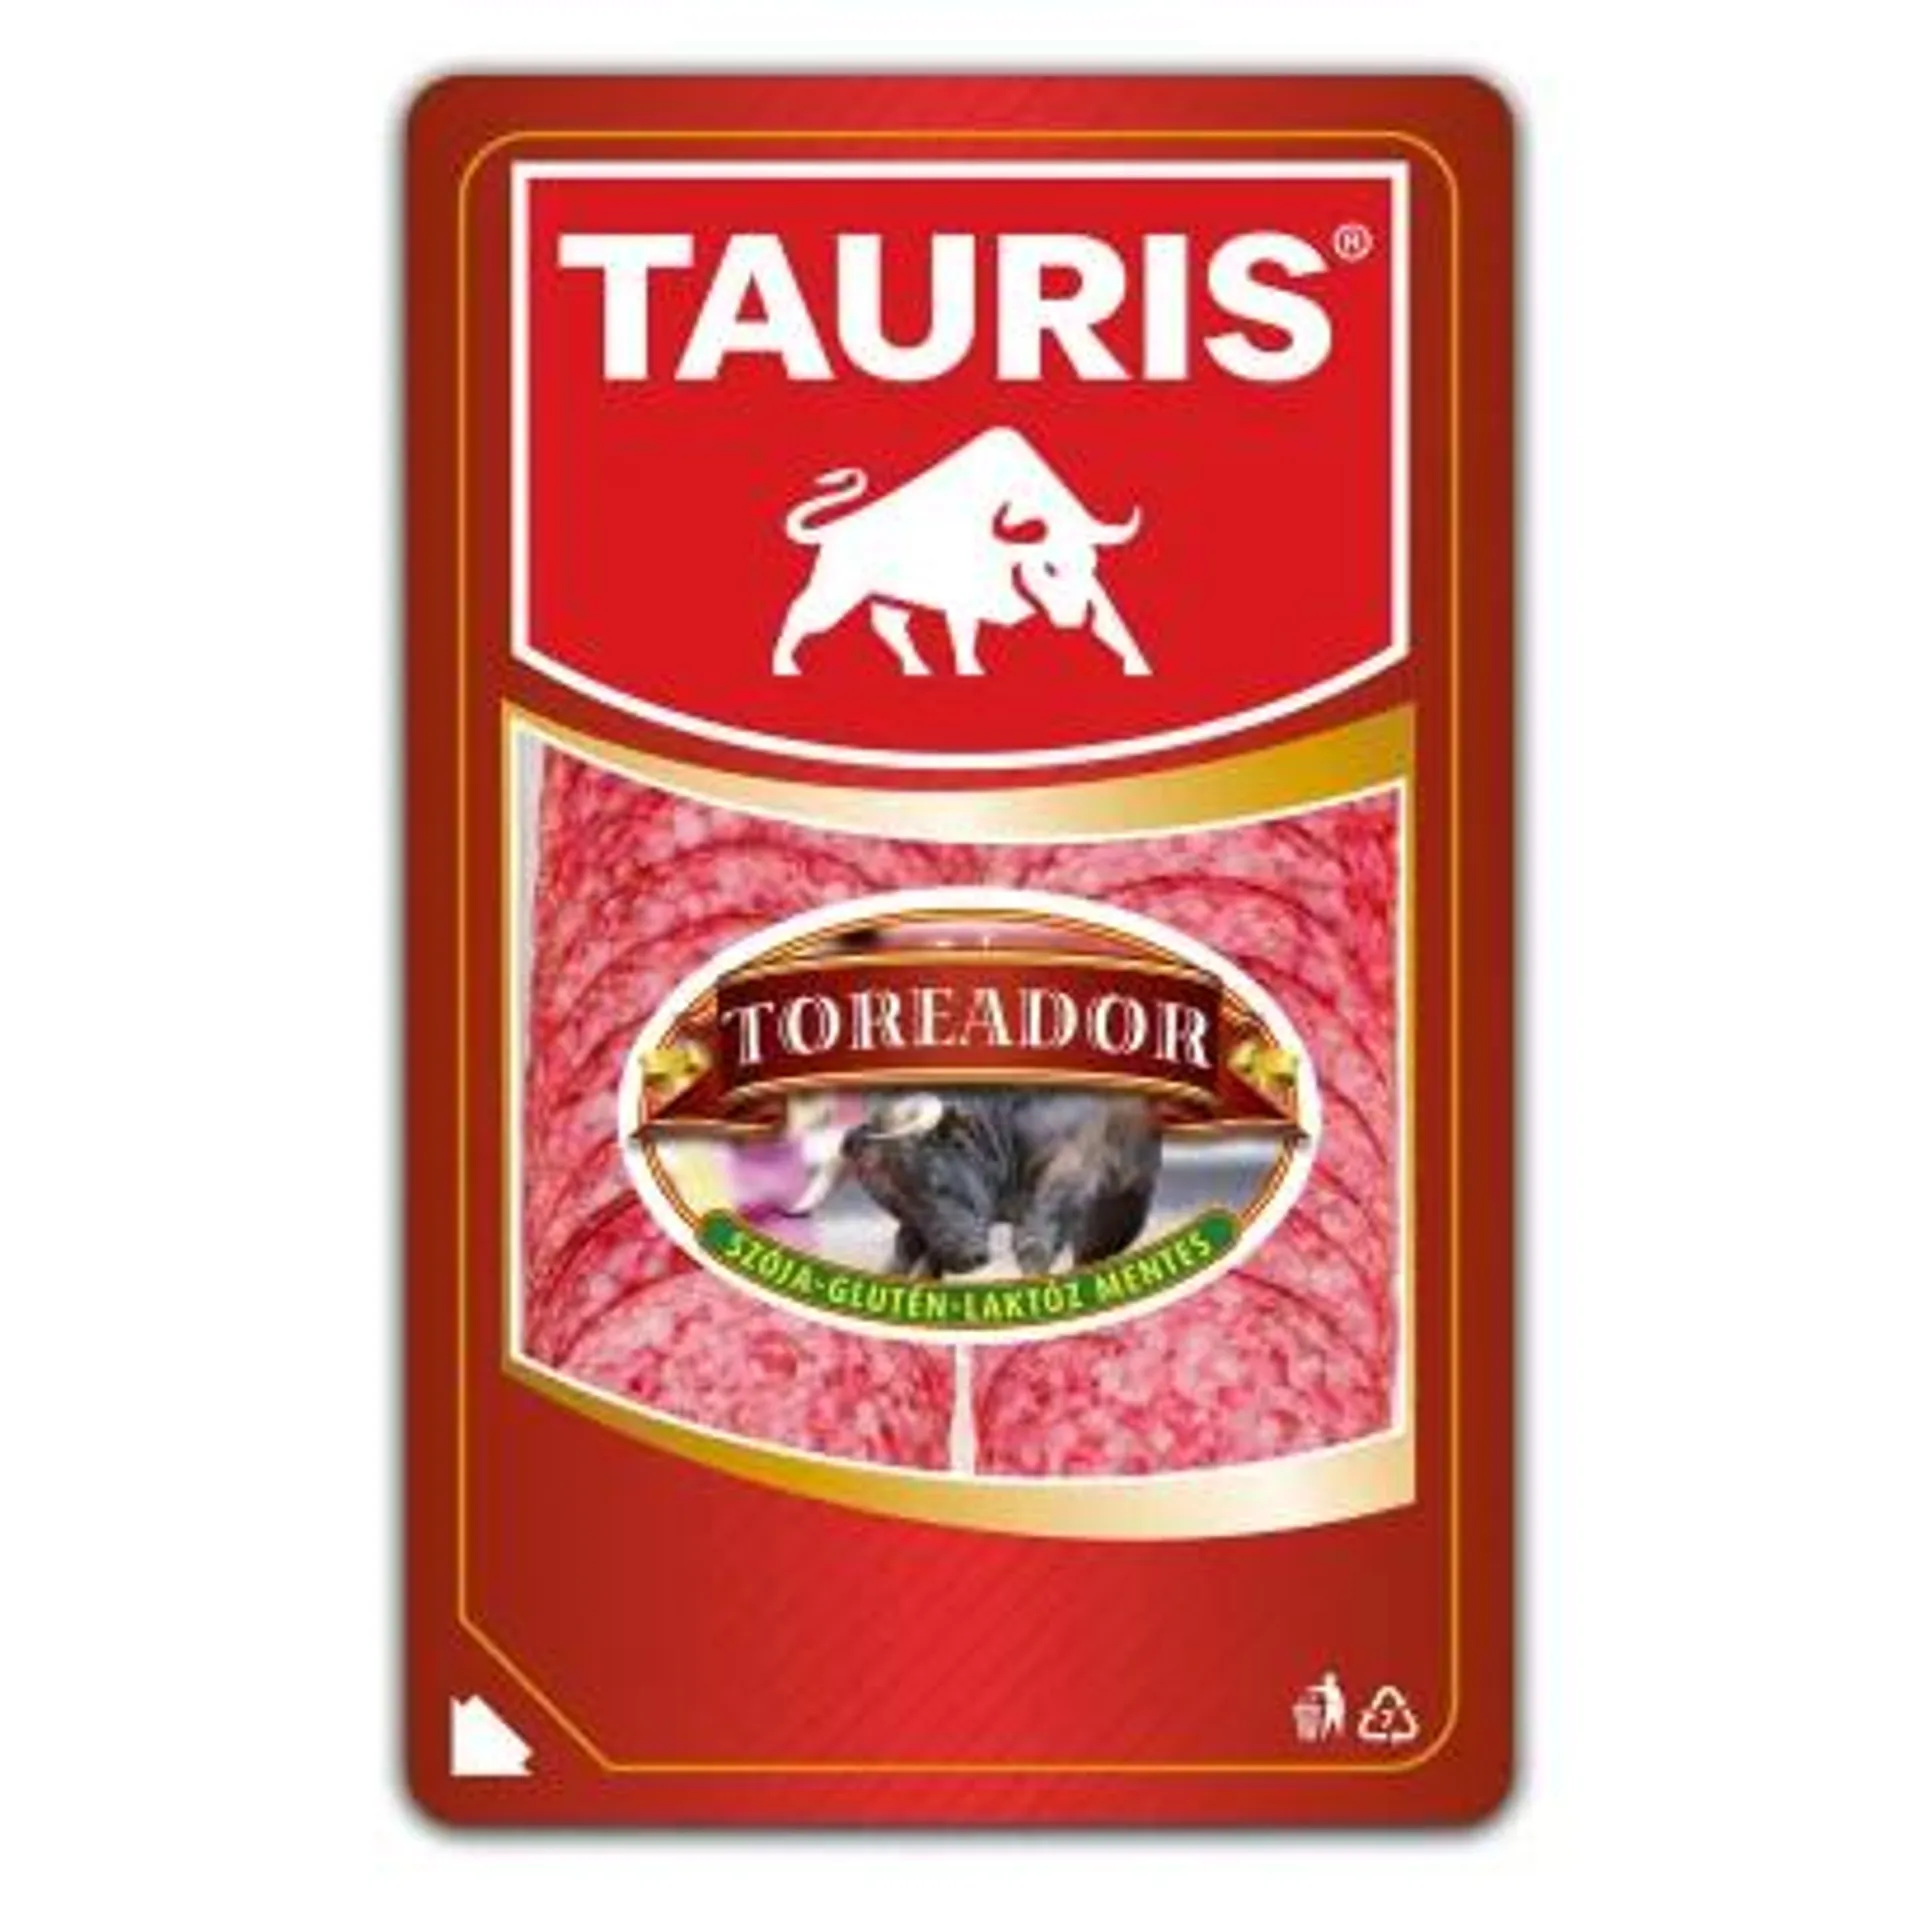 Tauris Toreador Sliced, Smoked, Mosaic Meat Product 55 g